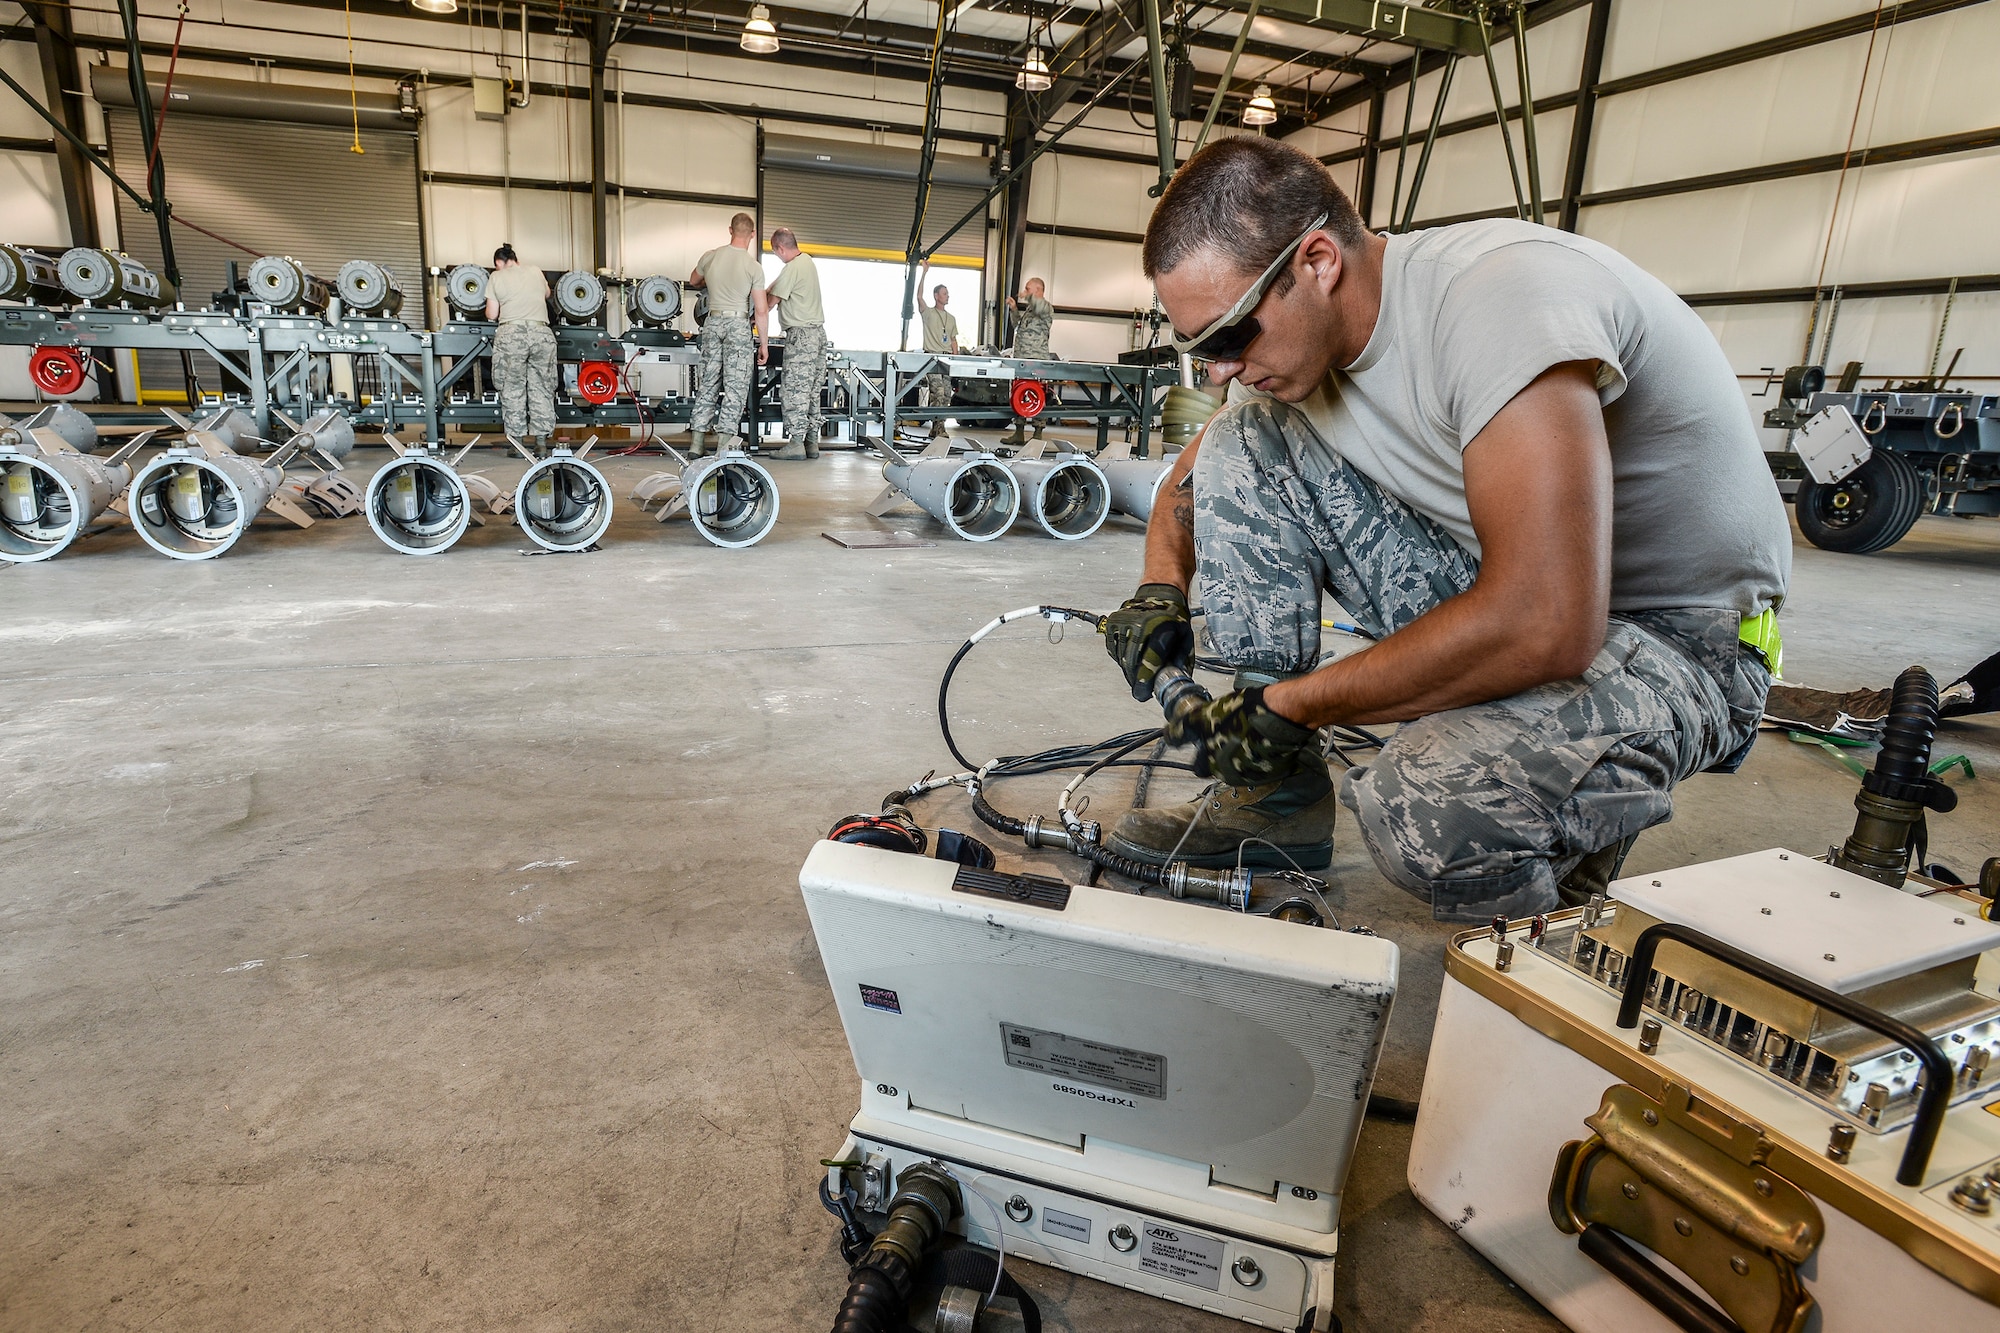 Senior Airman Cameron Kidd, 325th Maintenance Squadron, Tyndall Air Force Base, Fla., readies equipment for loading GPS data into GBU-32 bomb tail sections Aug. 2 at Hill AFB, Utah. The bombs will be dropped at the Utah Test and Training Range during the air-to-ground exercise known as Combat Hammer. Combat Hammer tests precision weapons for performance and suitability for combat. (U.S. Air Force photo by Paul Holcomb)